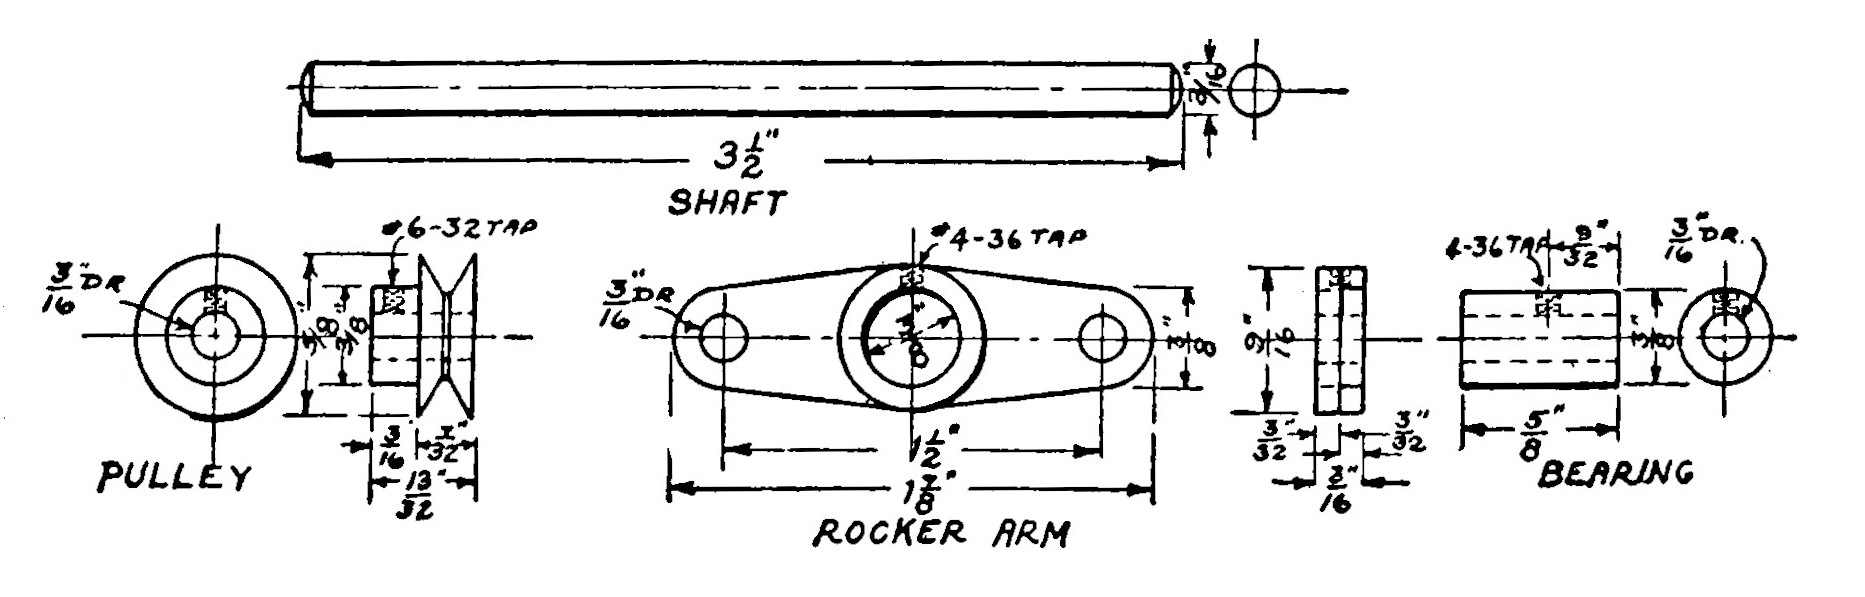 FIG. 71.—Details of the Shaft, Rocker Arm, Bearing and Pulley.